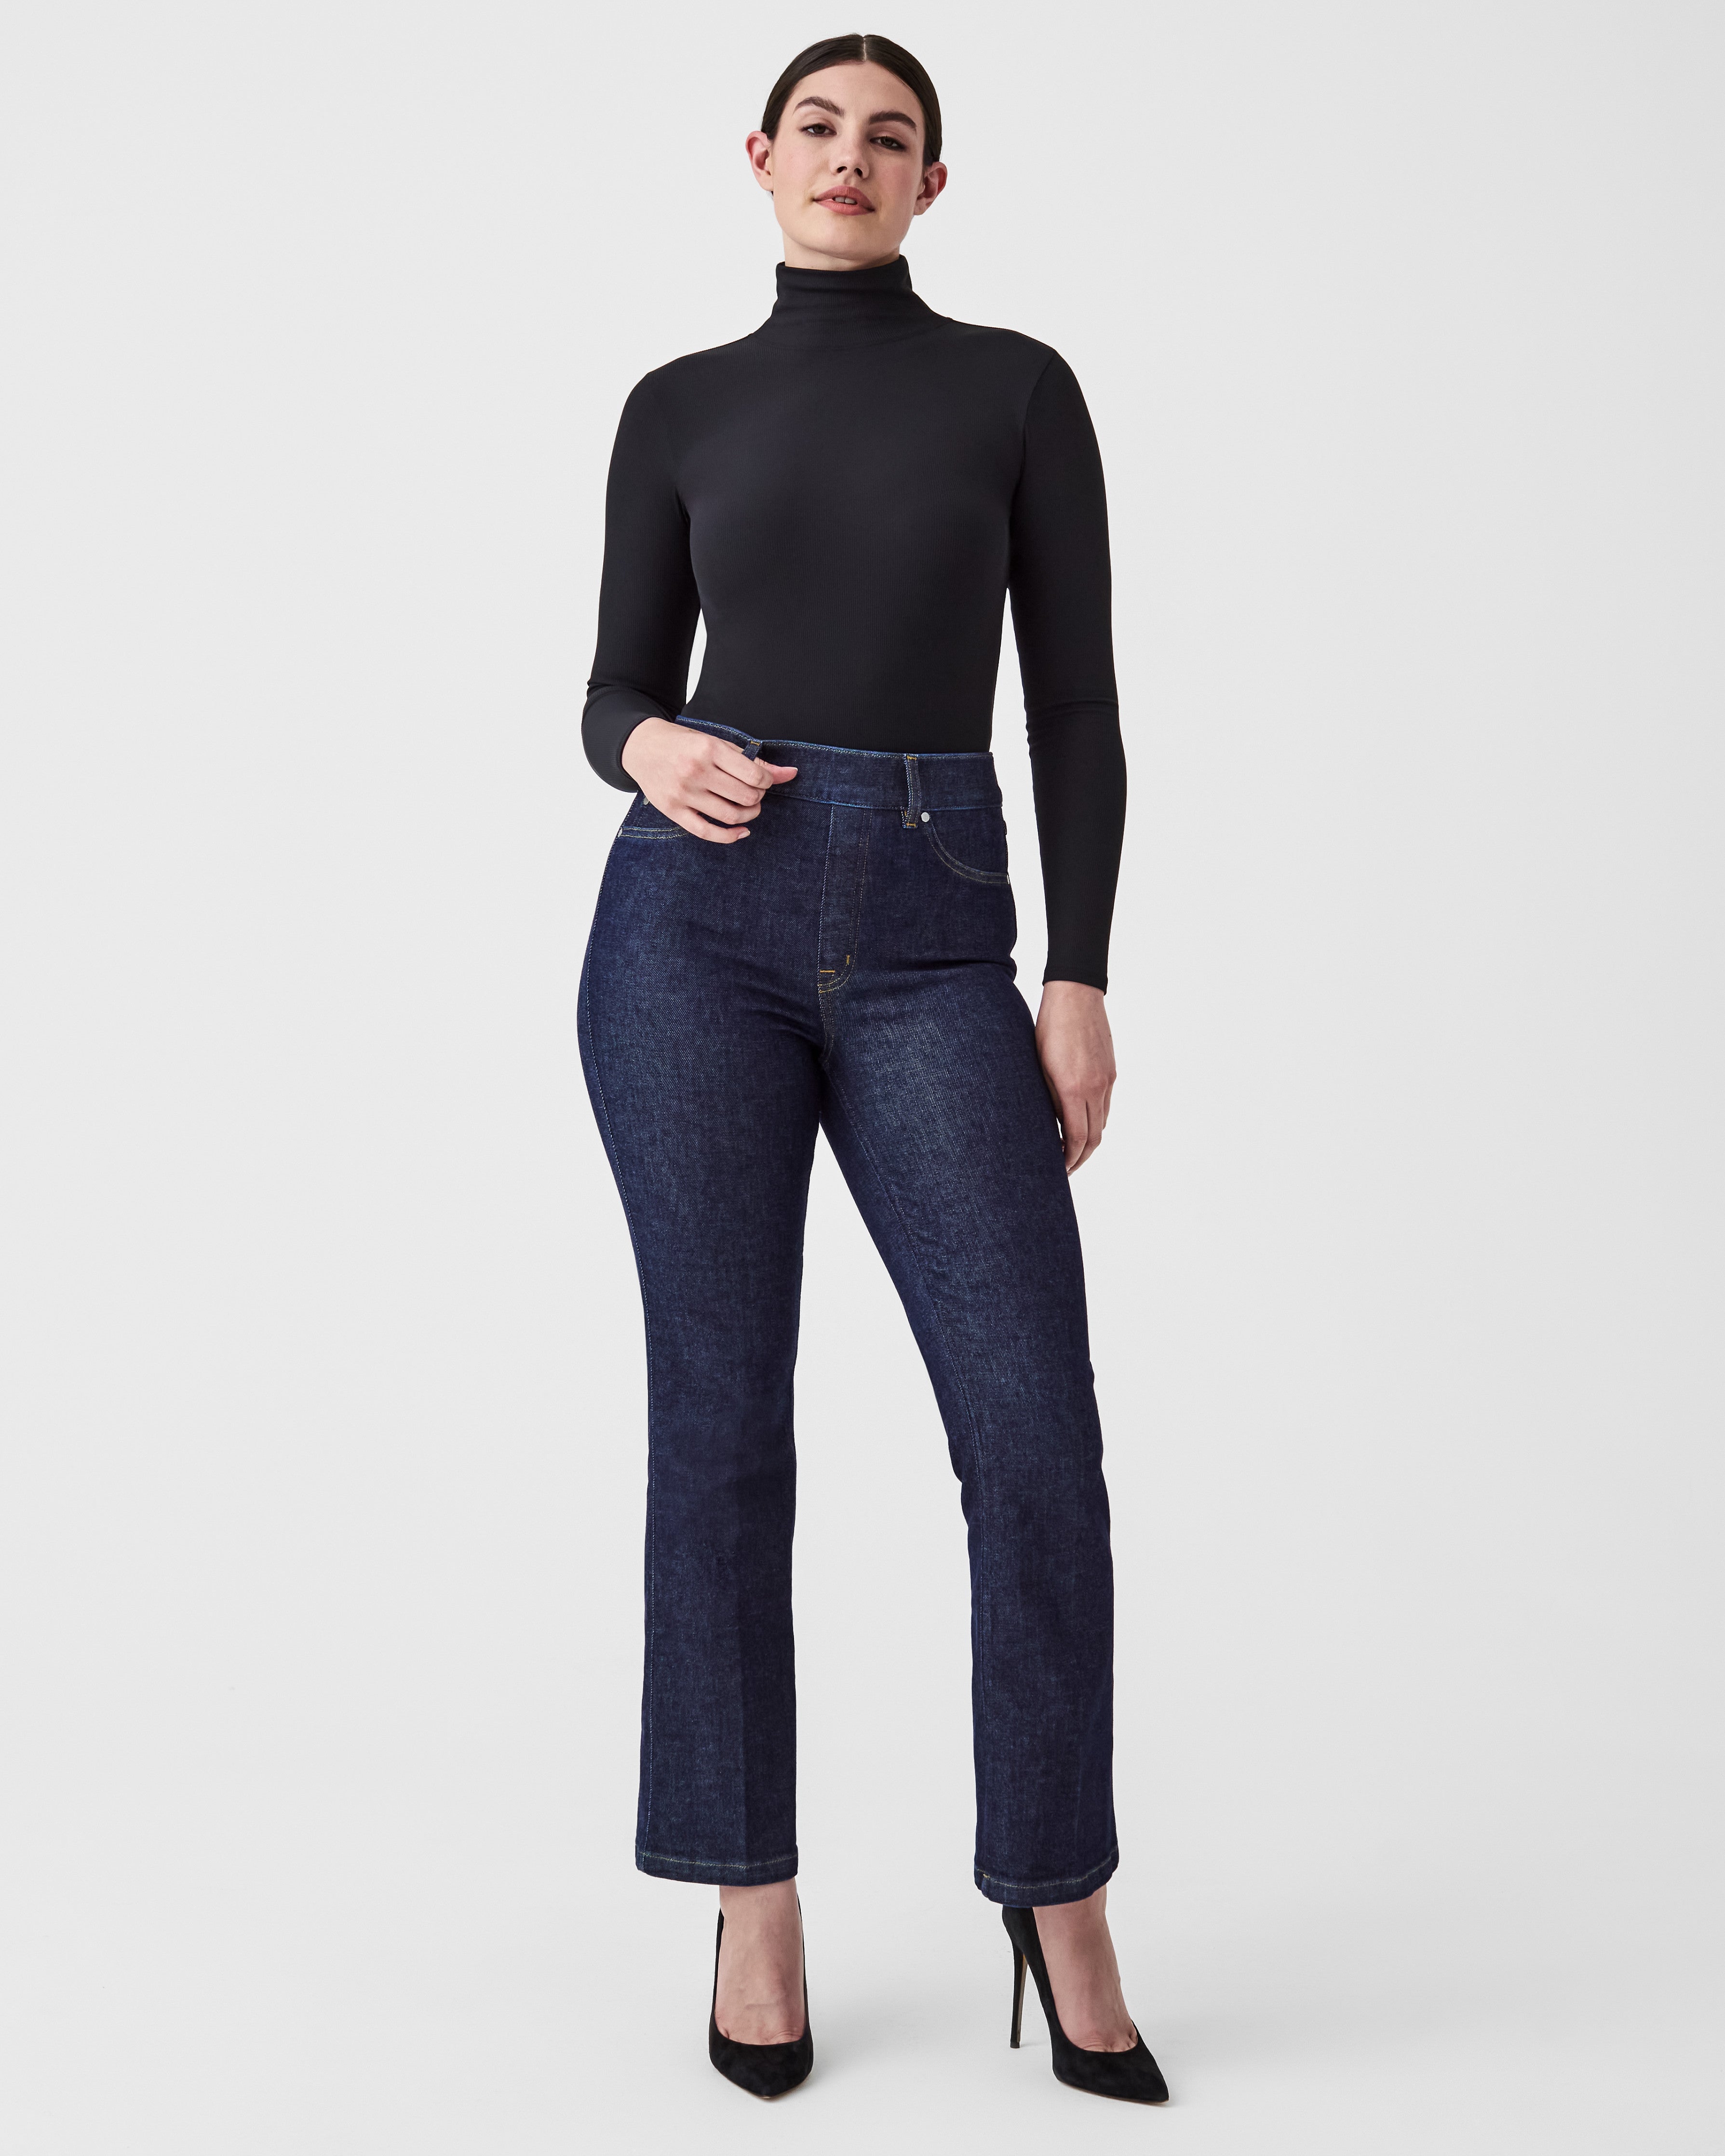 SPANX On Top and In Control 973 Long Sleeve Turtleneck Top Ladies